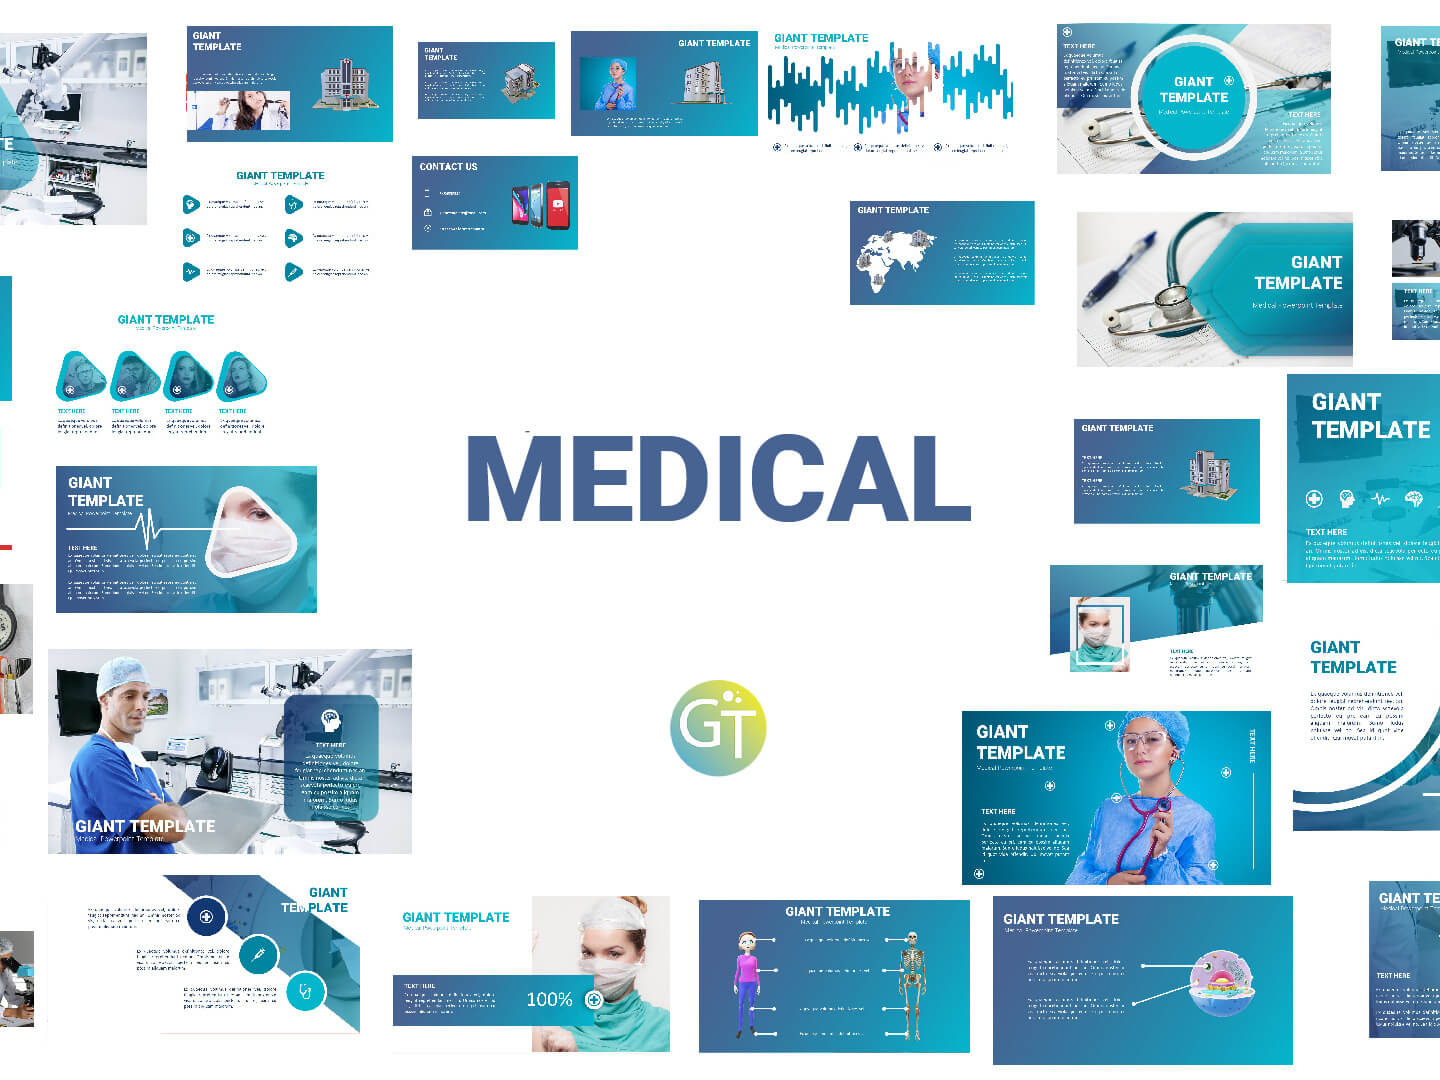 Medical Powerpoint Templates Free Downloadgiant Template In Free Powerpoint Presentation Templates Downloads